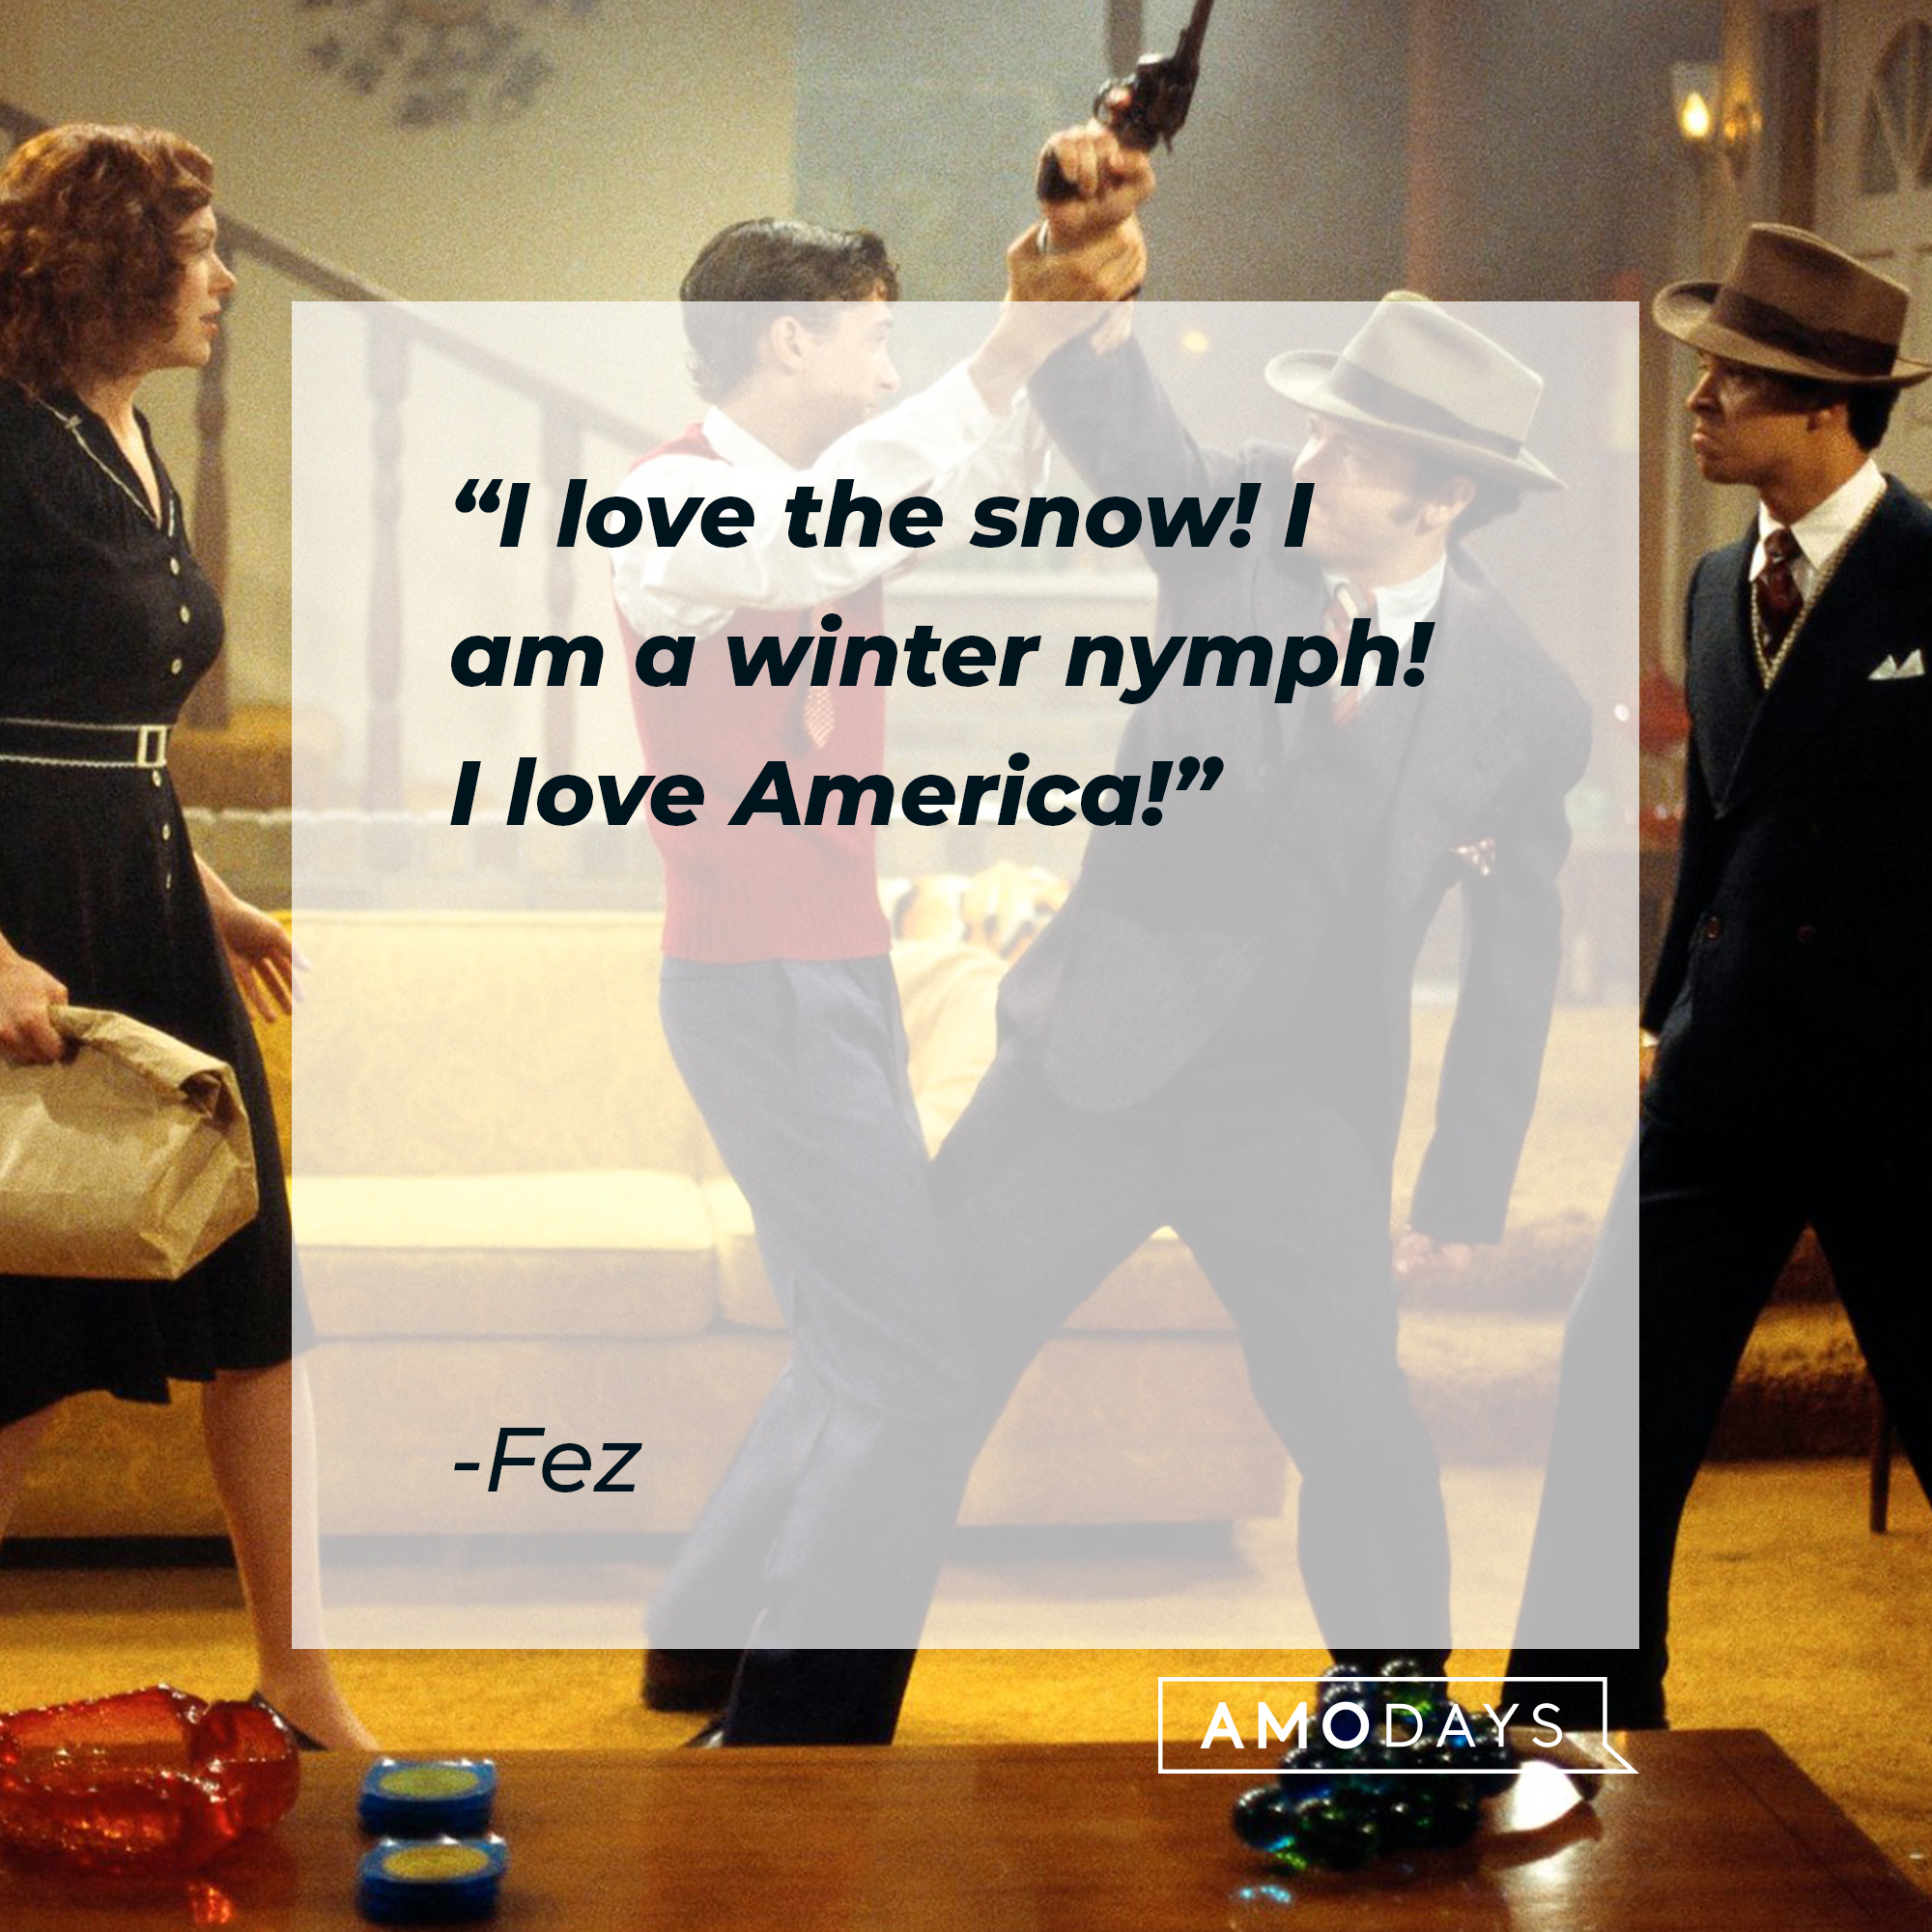 Fez's quote: “I love the snow! I am a winter nymph! I love America!” | Source: facebook.com/That-70s-Show-Official